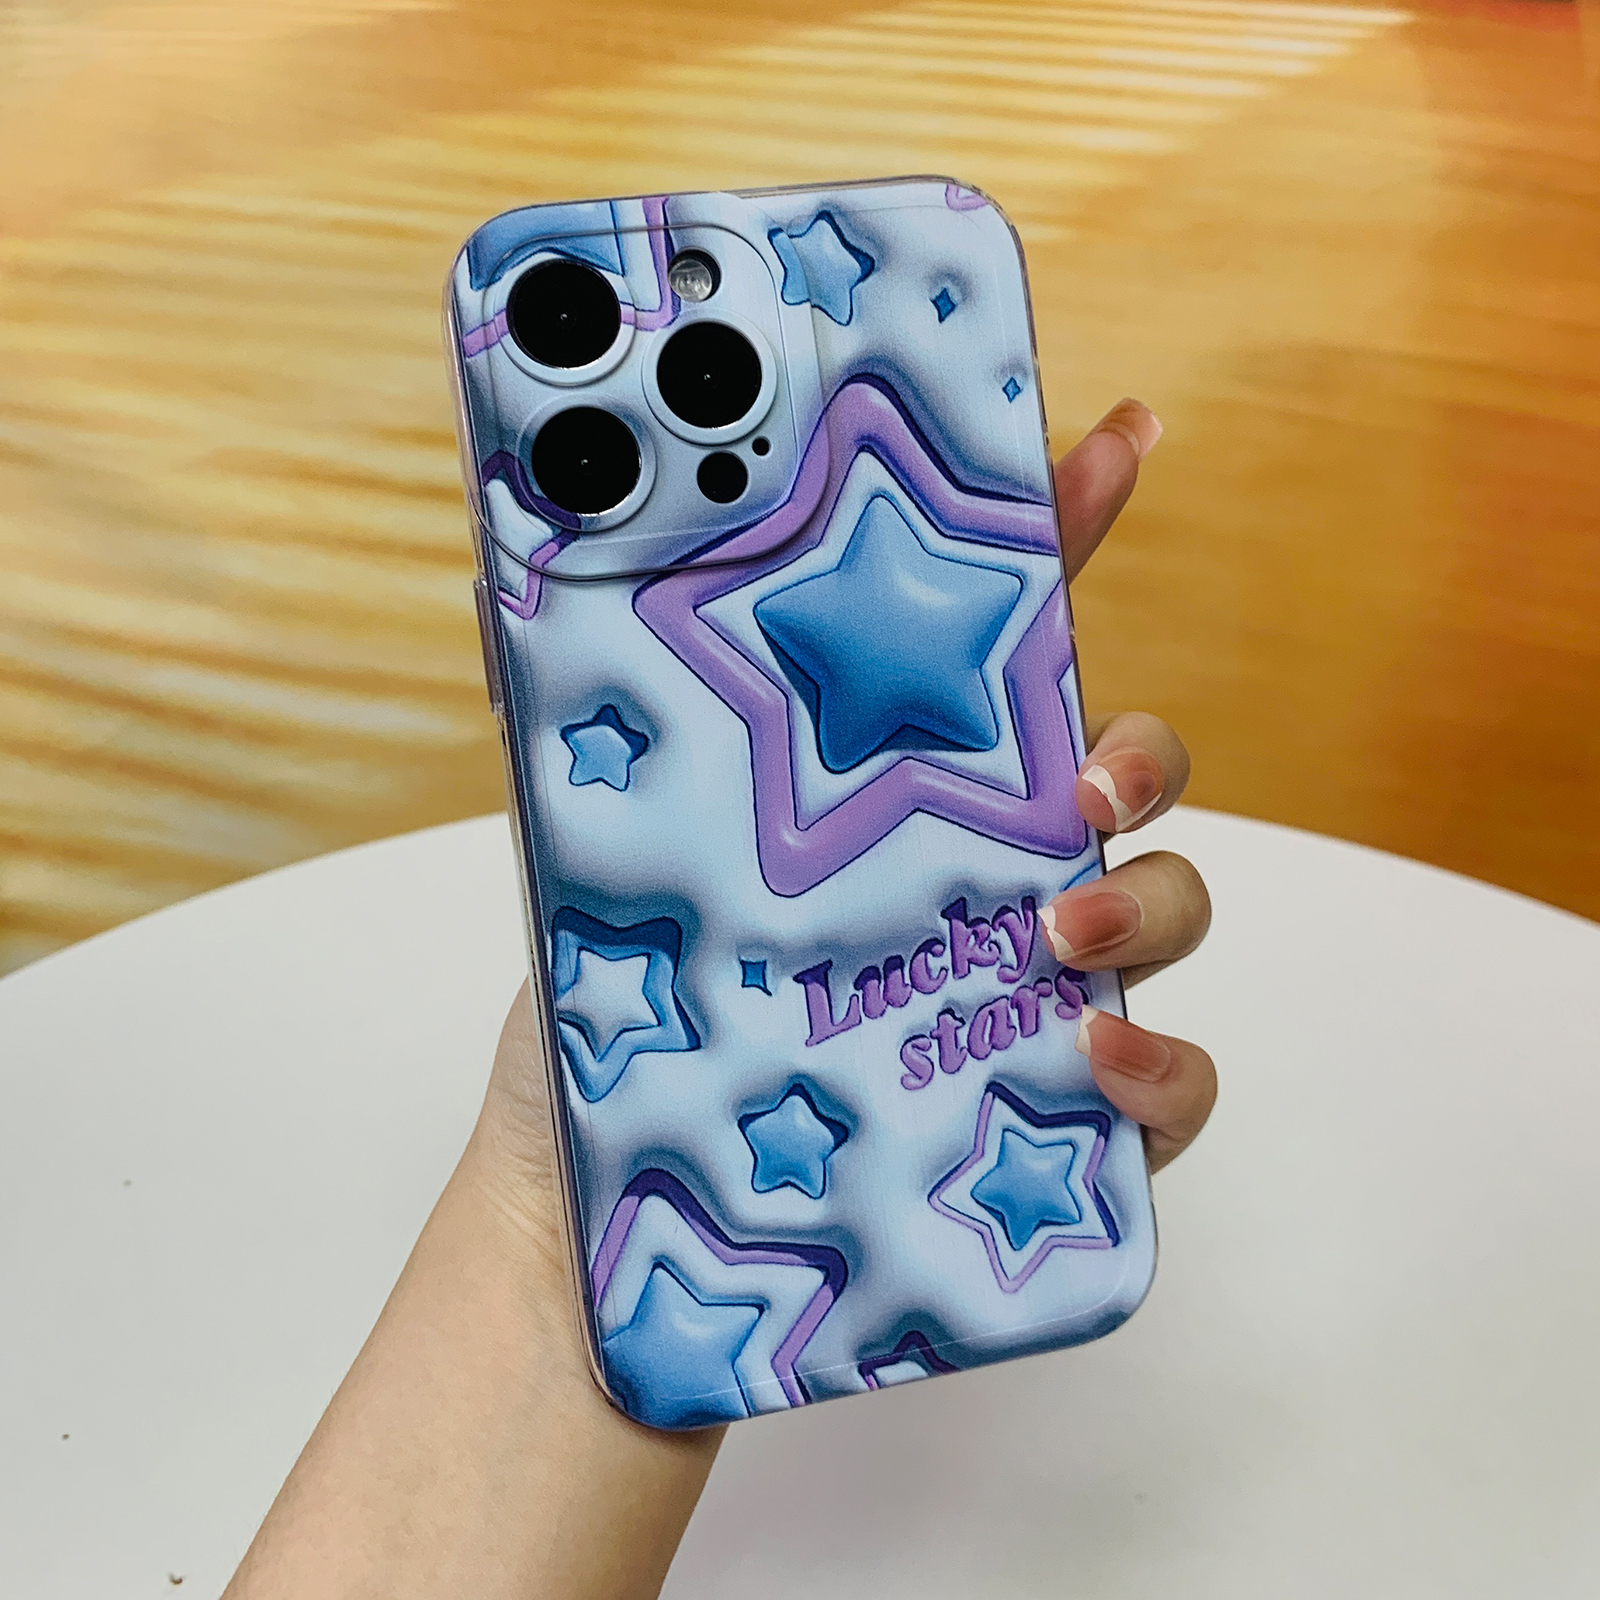 Luxury Bling Lucky Flower Square Case For iPhone 13 12 11 Pro Max XS Max XR  8 7